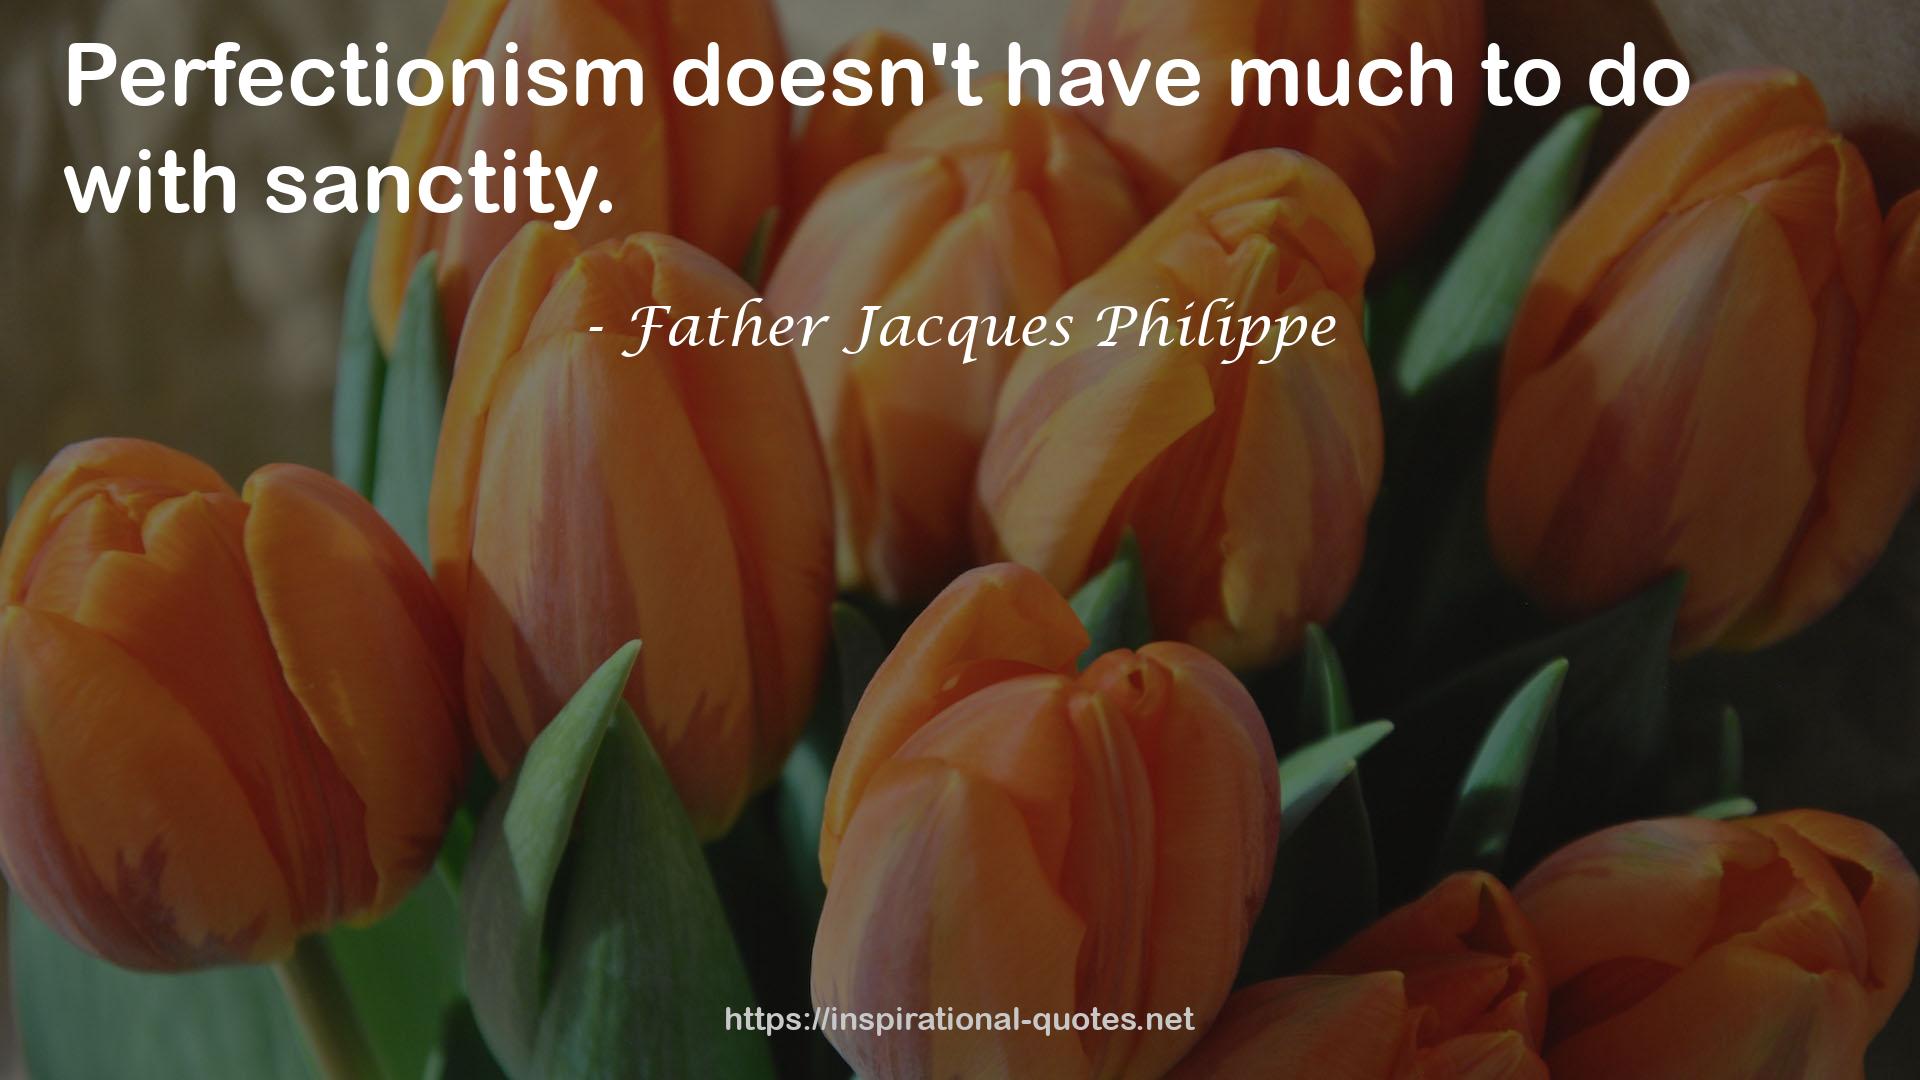 Father Jacques Philippe QUOTES